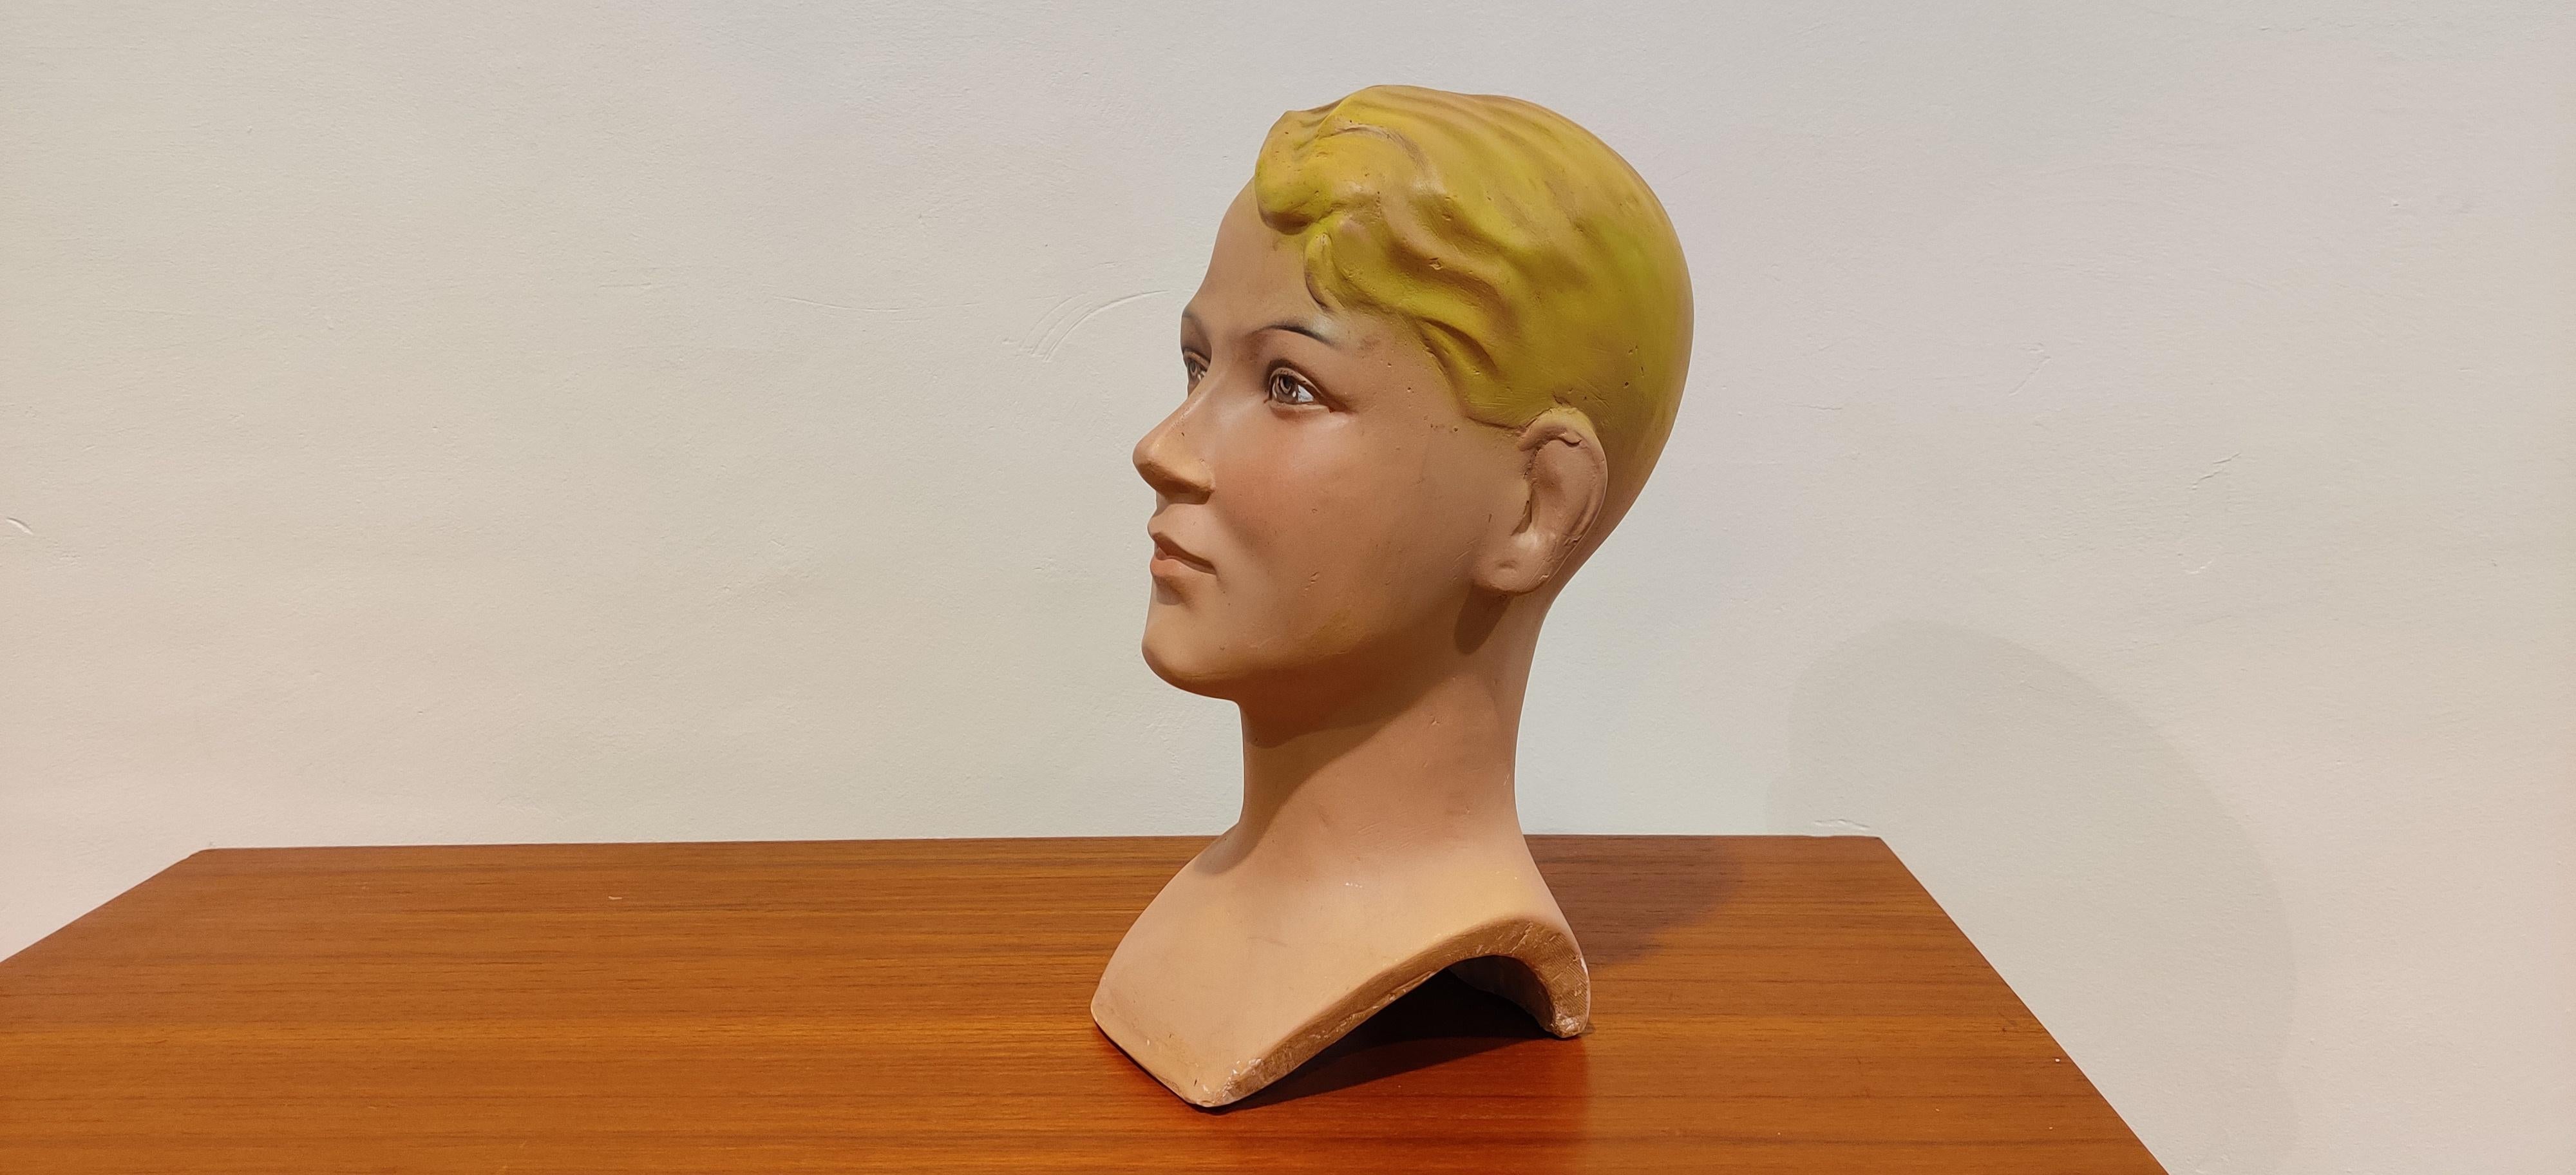 Beautiful mannequin head made from plaster.

It has some minor user traces.

Comes from a lot acquired from a clothes shop that stopped activities.

Great decorative item to display glasses, hats,

France, 1960s

Measures: Height